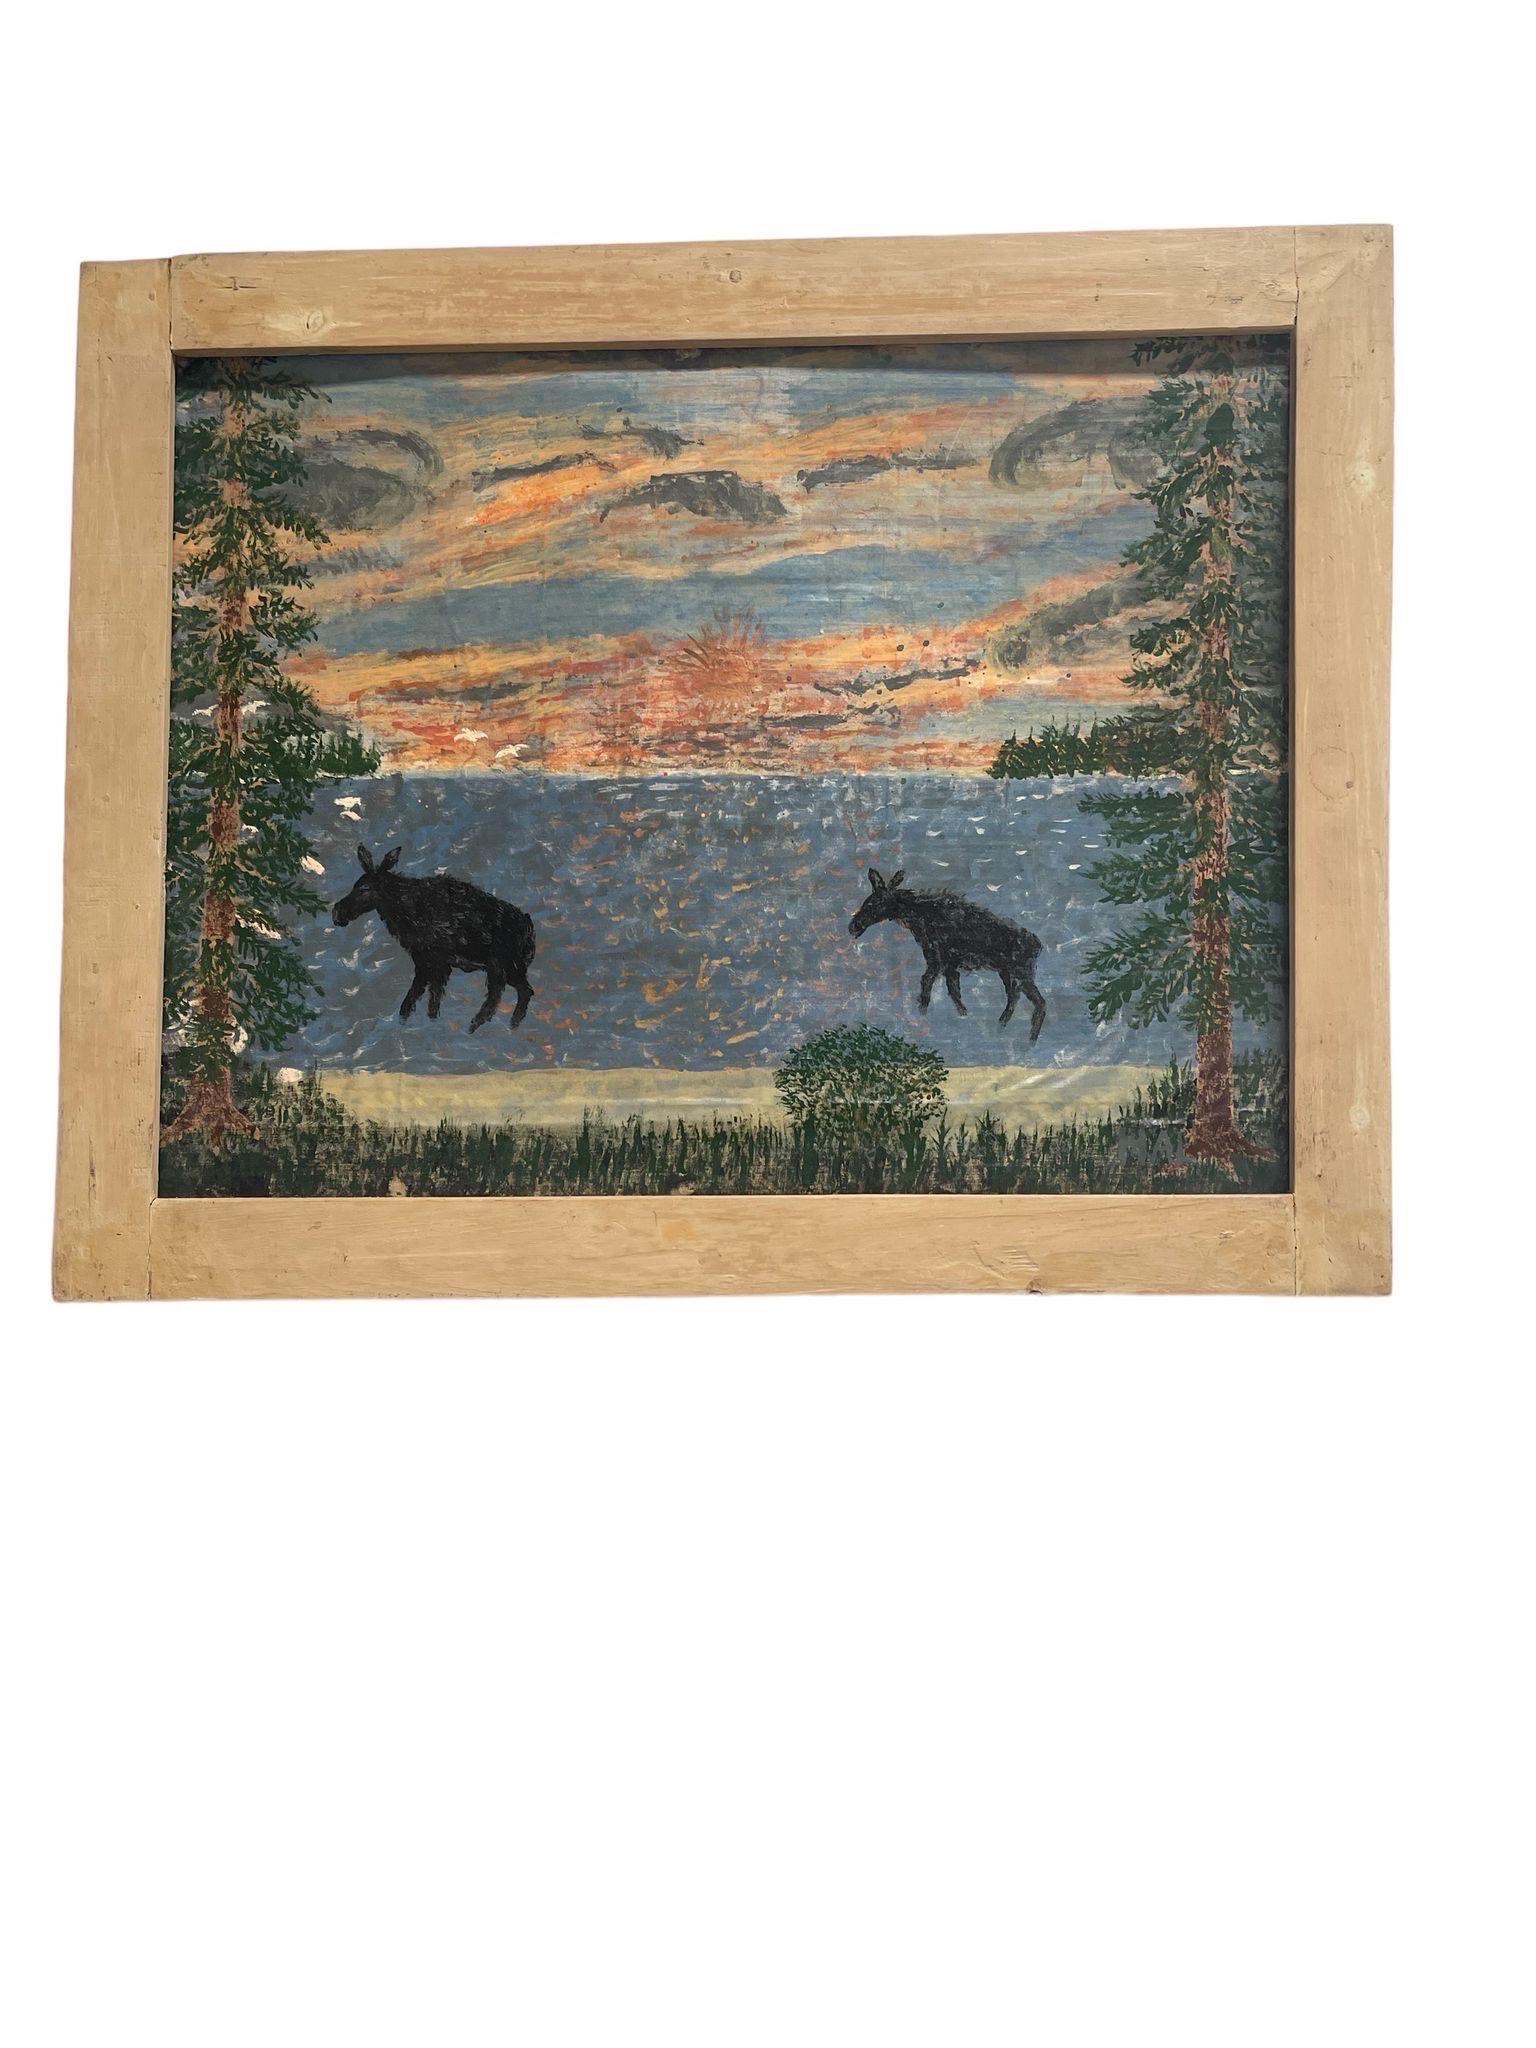 Vintage Wooden Frame Abstract Nature Drawing. Moose in Lake Drawing. Possibly Pastel.

Dimensions. 26 1/2 W ; 1/2 D ; 21 H